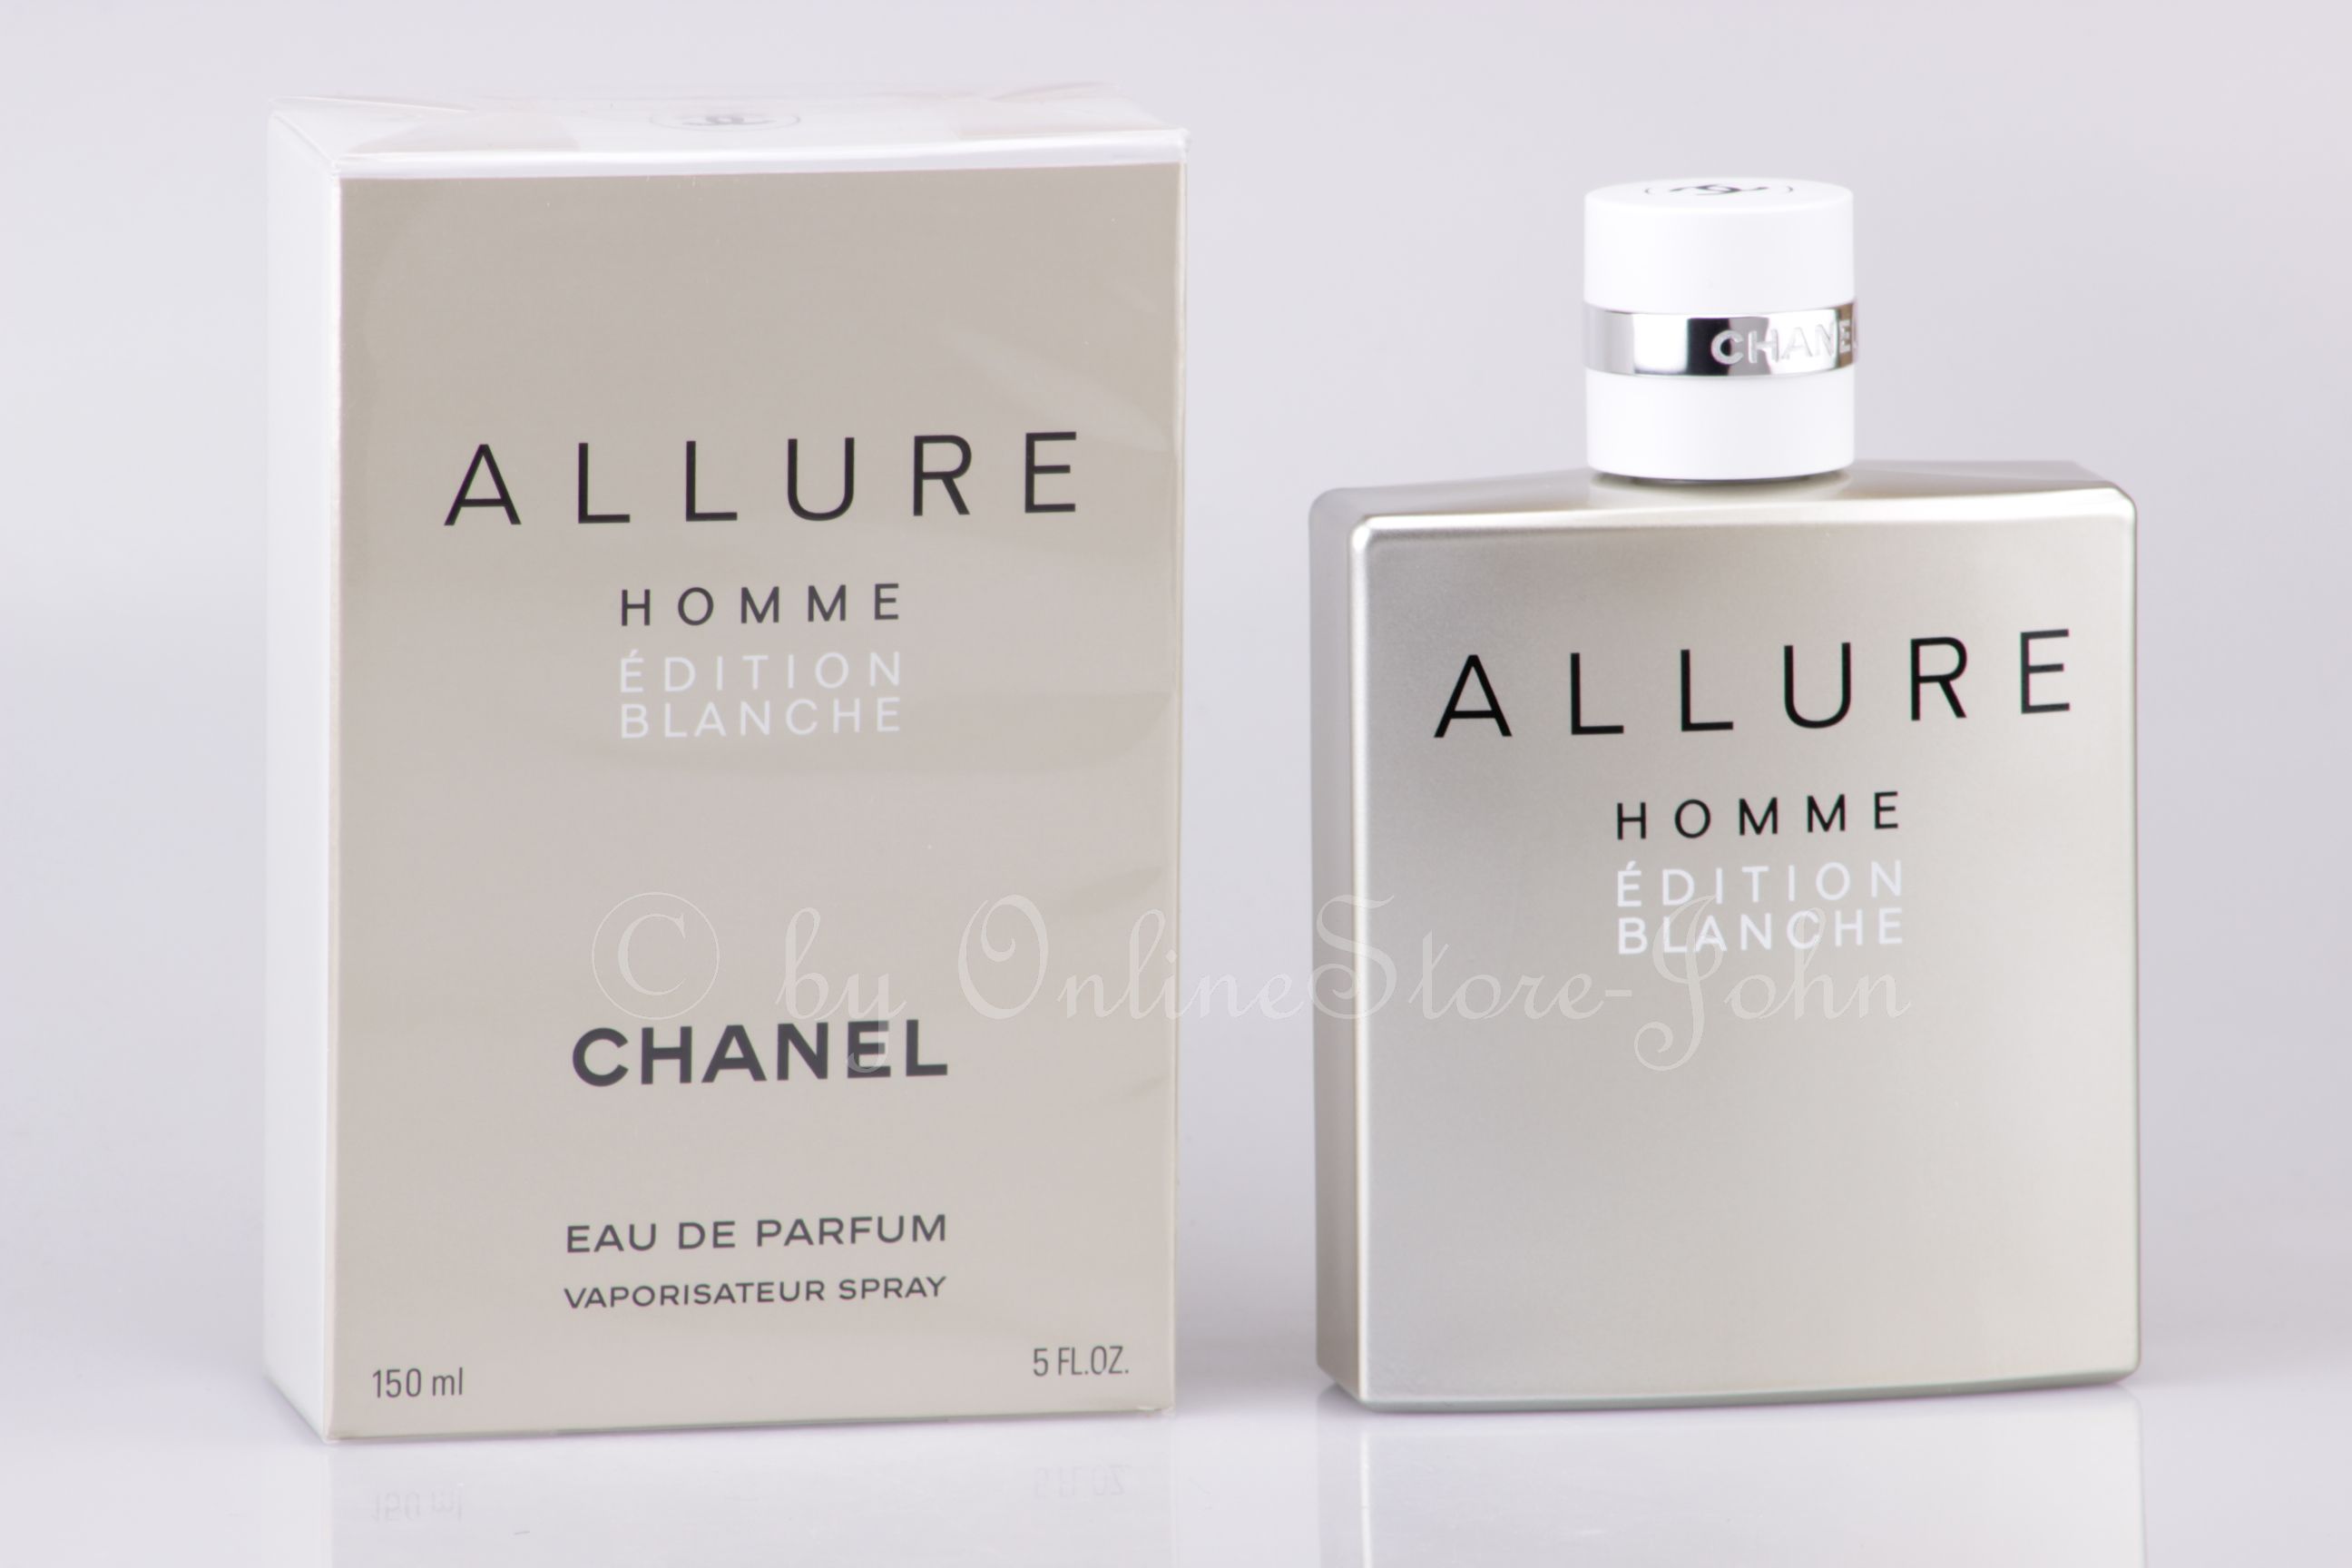 Chanel homme edition blanche. Шанель Аллюр эдишн Бланш. Chanel Allure homme Sport Edition Blanche.